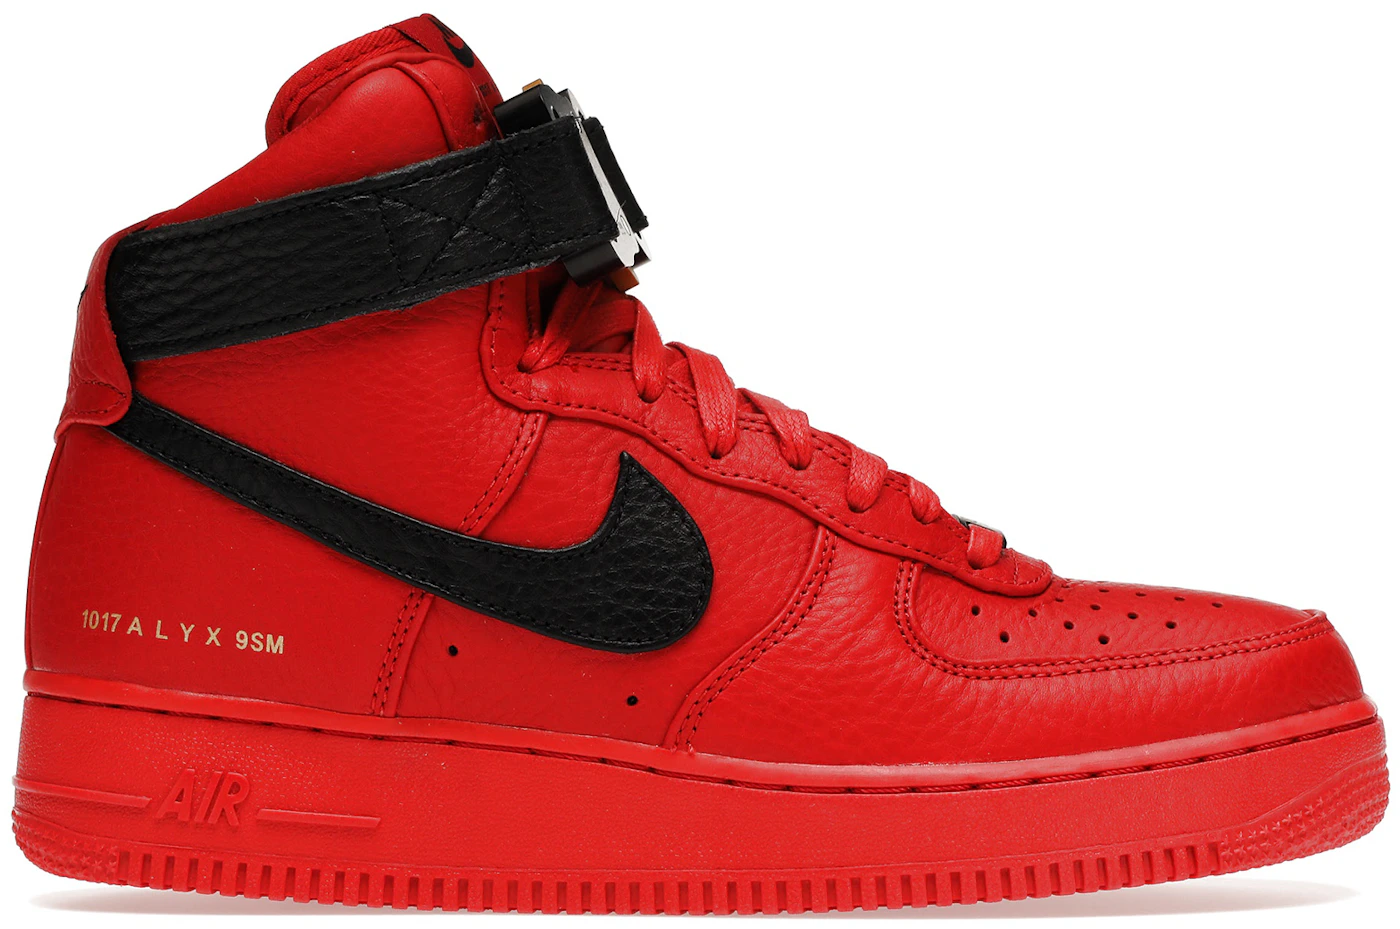 Mount Bank Great Barrier Reef composiet Nike Air Force 1 High 1017 ALYX 9SM Red Black Men's - CQ4018-601 - US